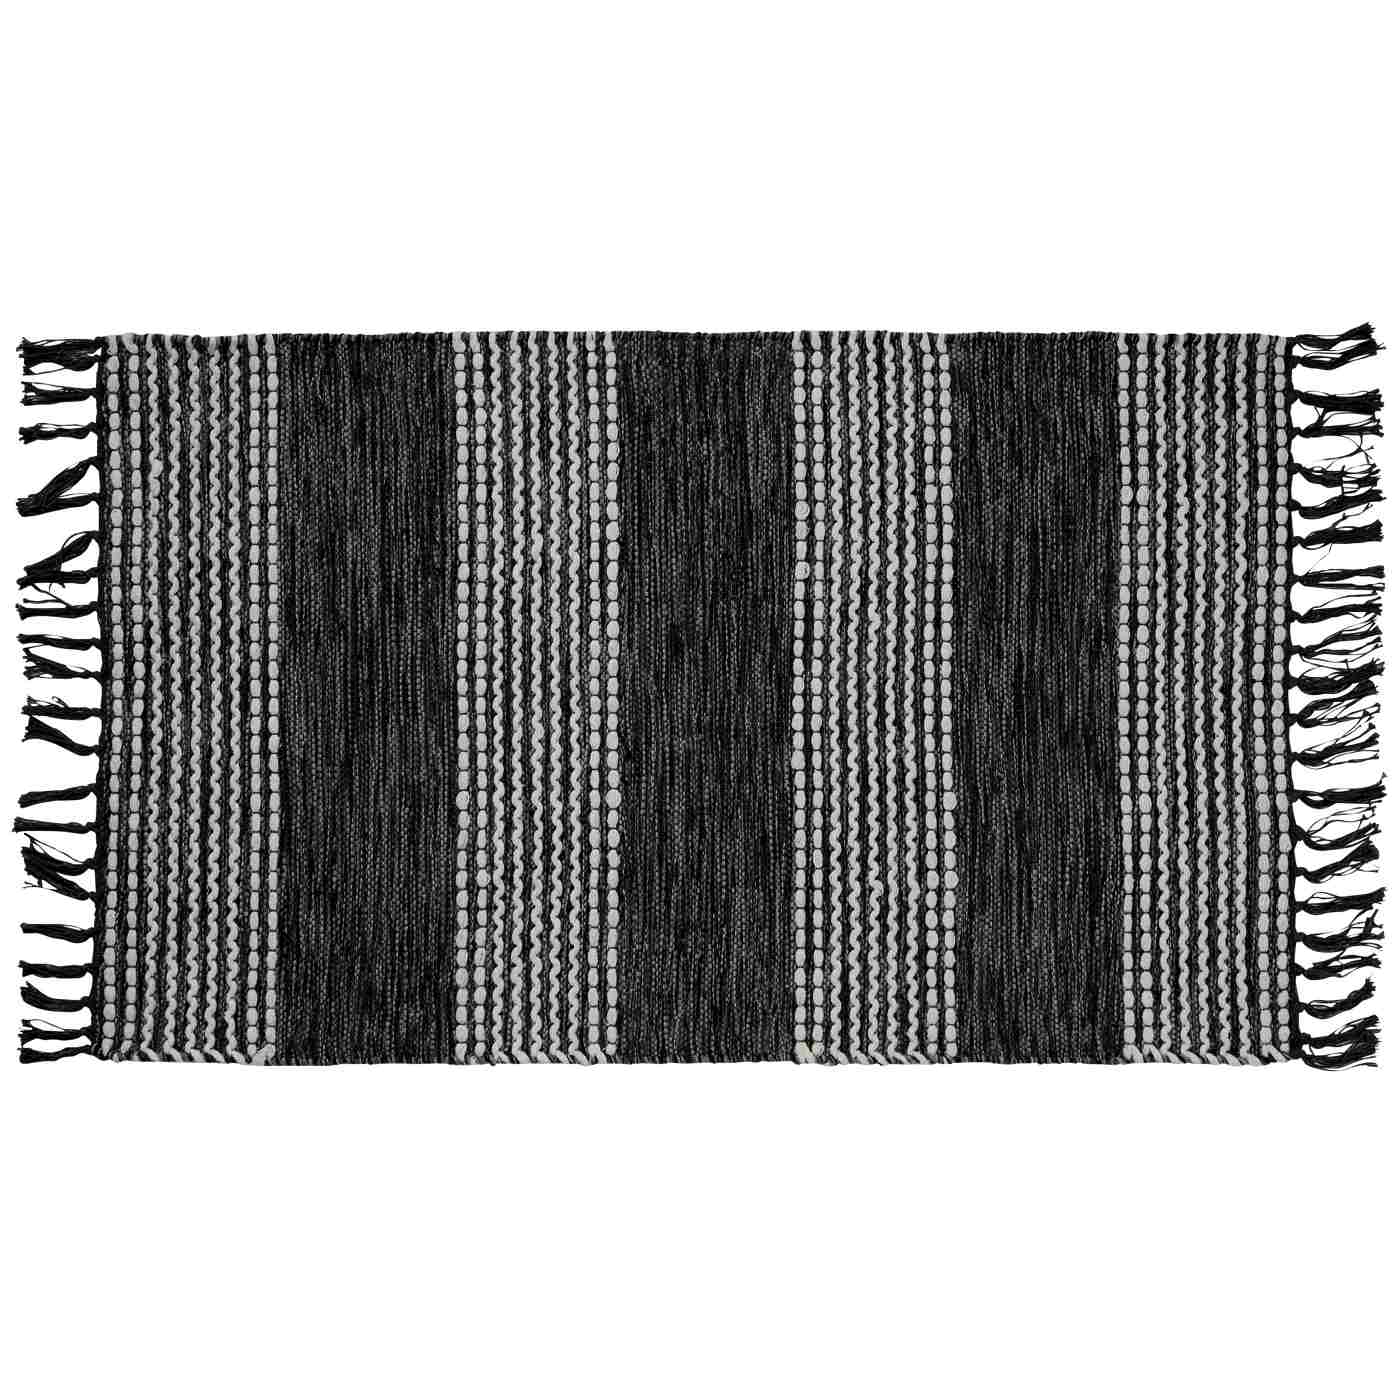 Haven + Key Striped Cotton Accent Rug - Black & White; image 1 of 2